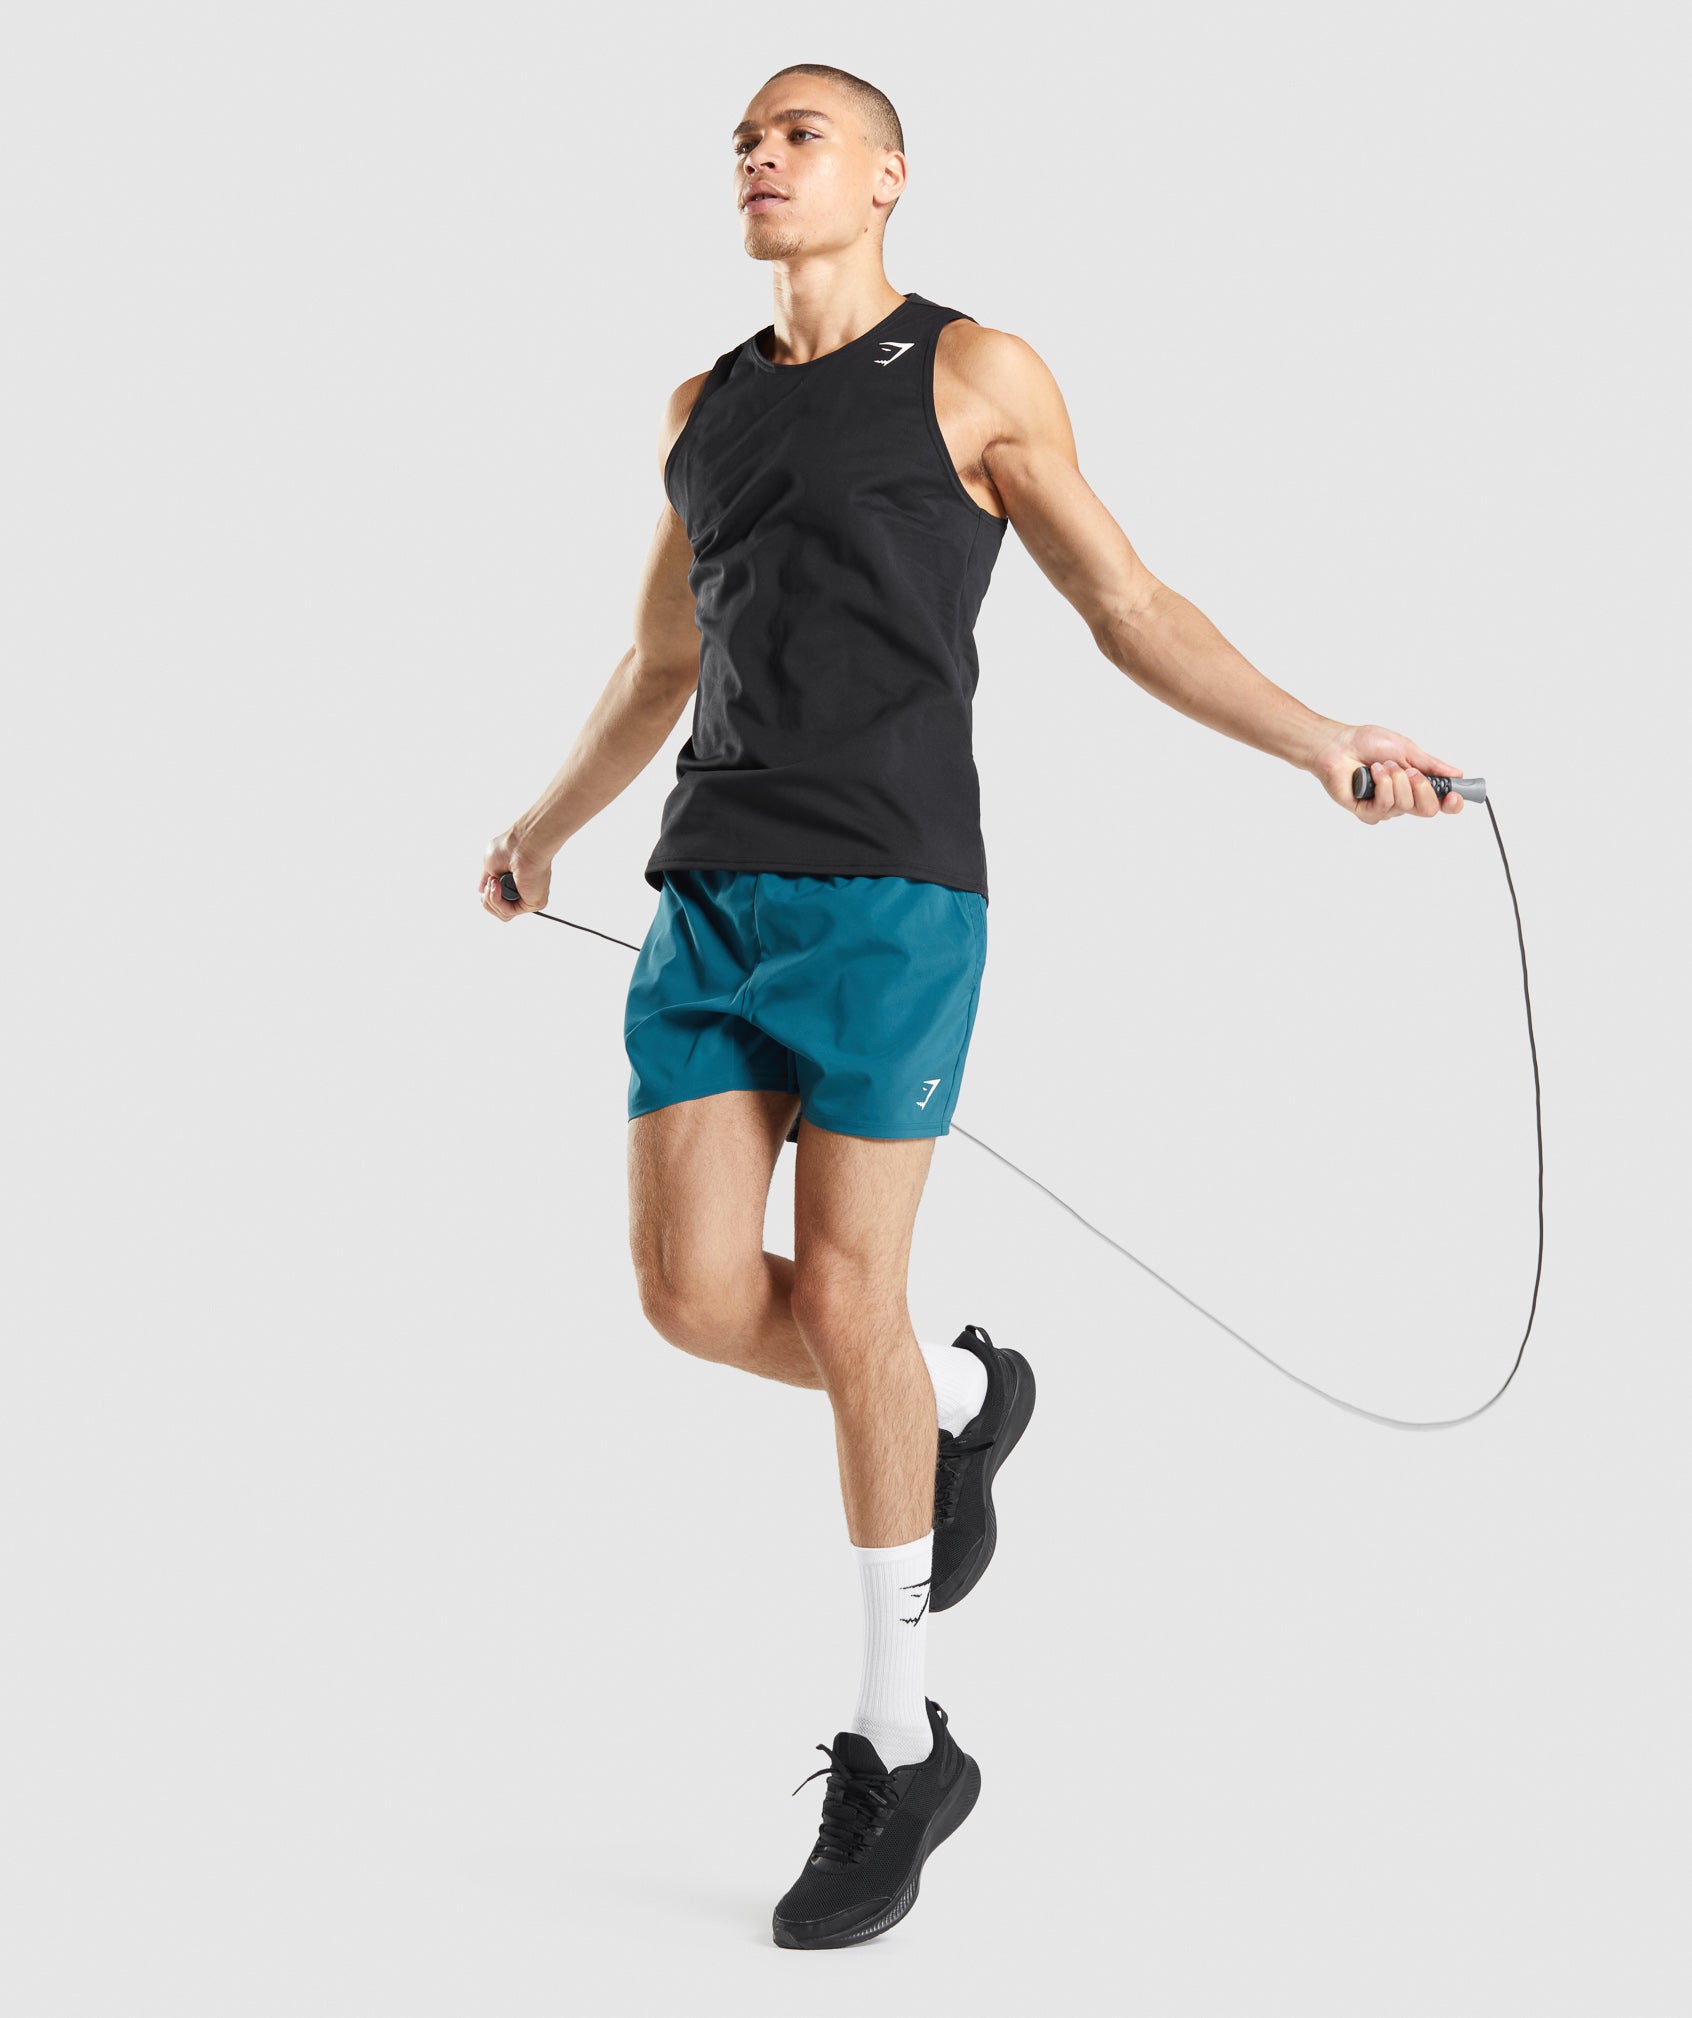 Skipping Rope in Black - view 5